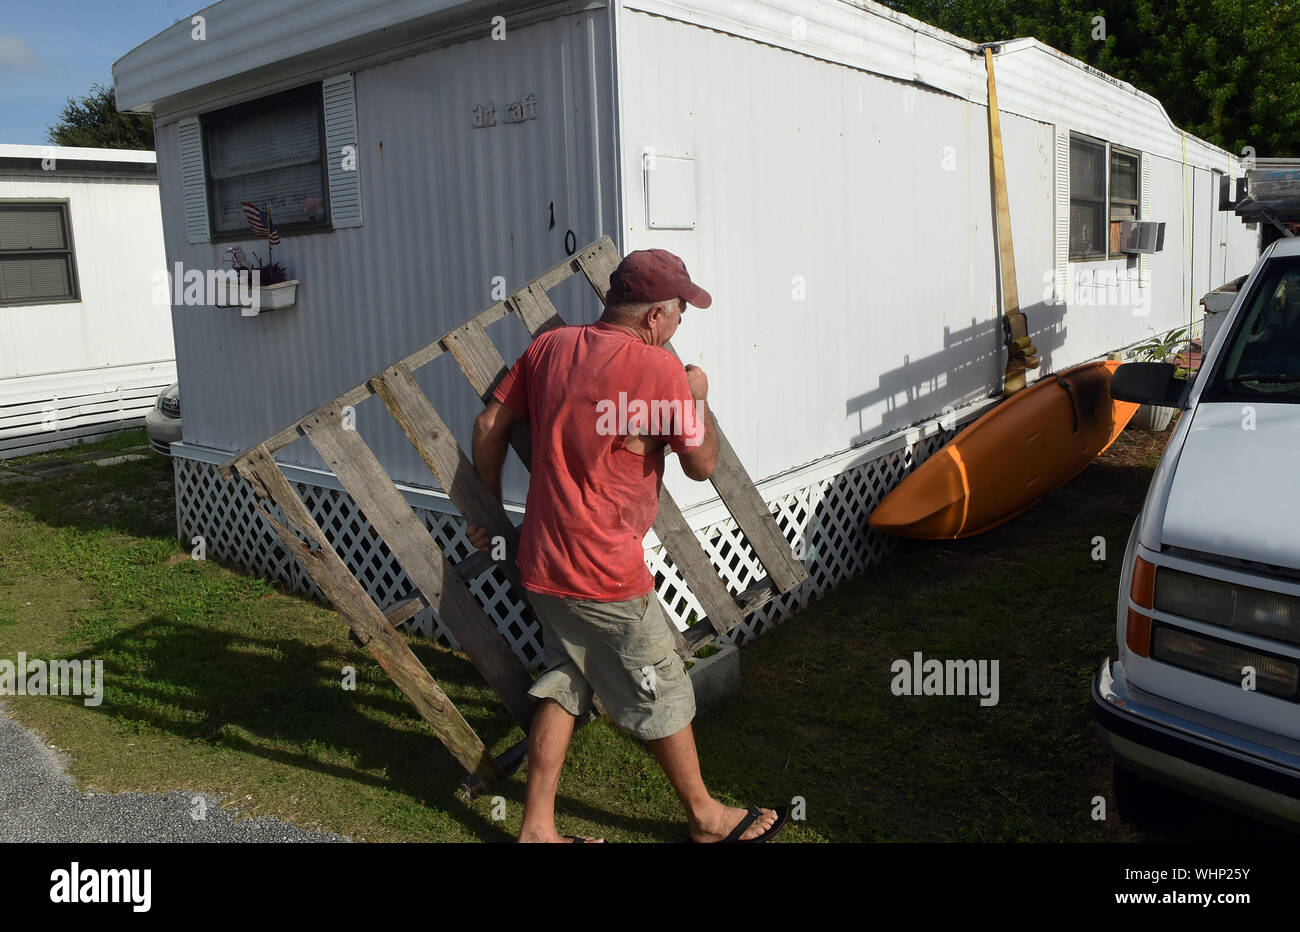 Cape Canaveral, United States. 02nd Sep, 2019. September 2, 2019 - Cape Canaveral, Florida, United States - A resident of the Cocoa Palms Mobile Home Park secures a wooden pallet in his yard before he evacuates as Hurricane Dorian is forecast to move dangerously close to the coast to Florida after striking the Bahamas as a Category 5 storm, on September 2, 2019 in Cape Canaveral, Florida. Credit: Paul Hennessy/Alamy Live News Stock Photo